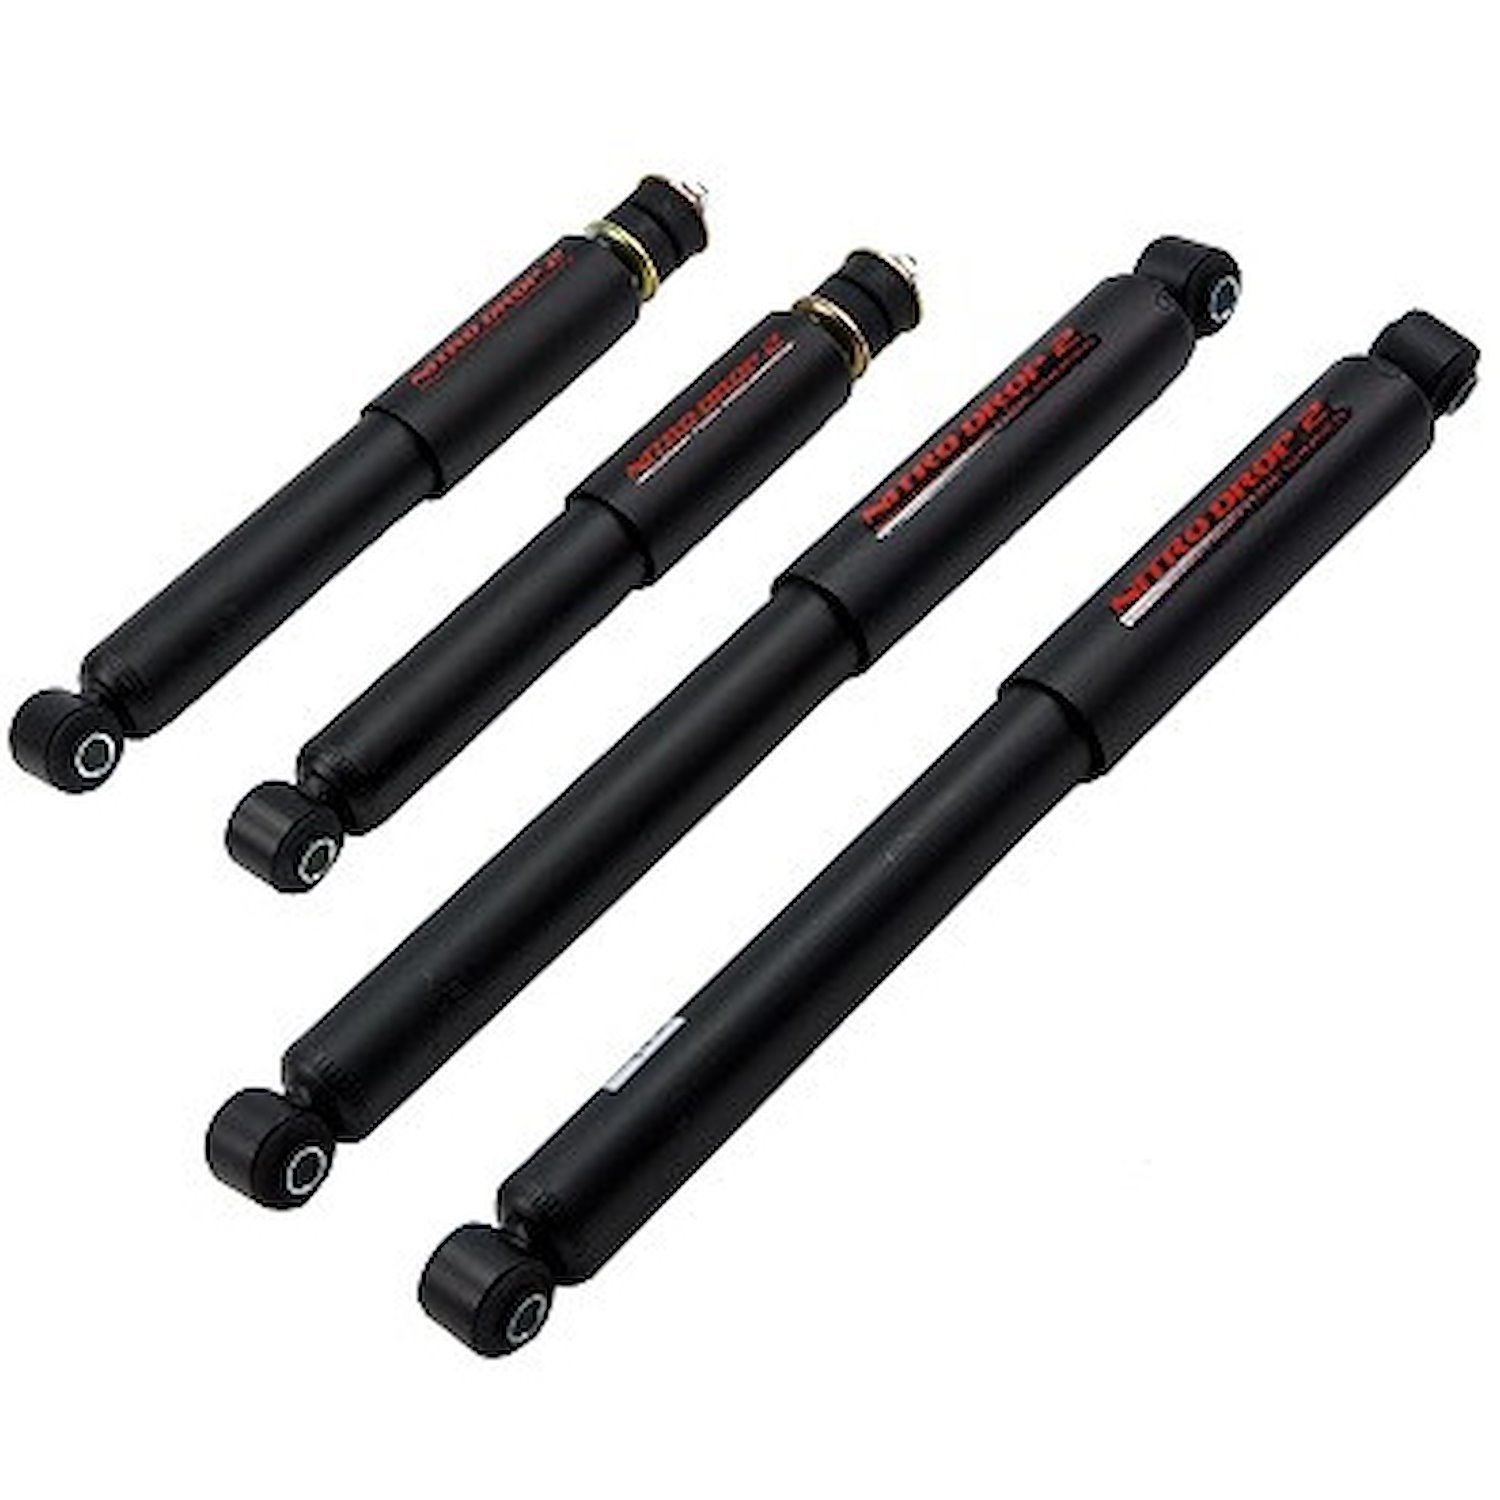 Nitro Drop 2 Shock Set for 1997-2002 Ford Expedition/Lincoln Navigator